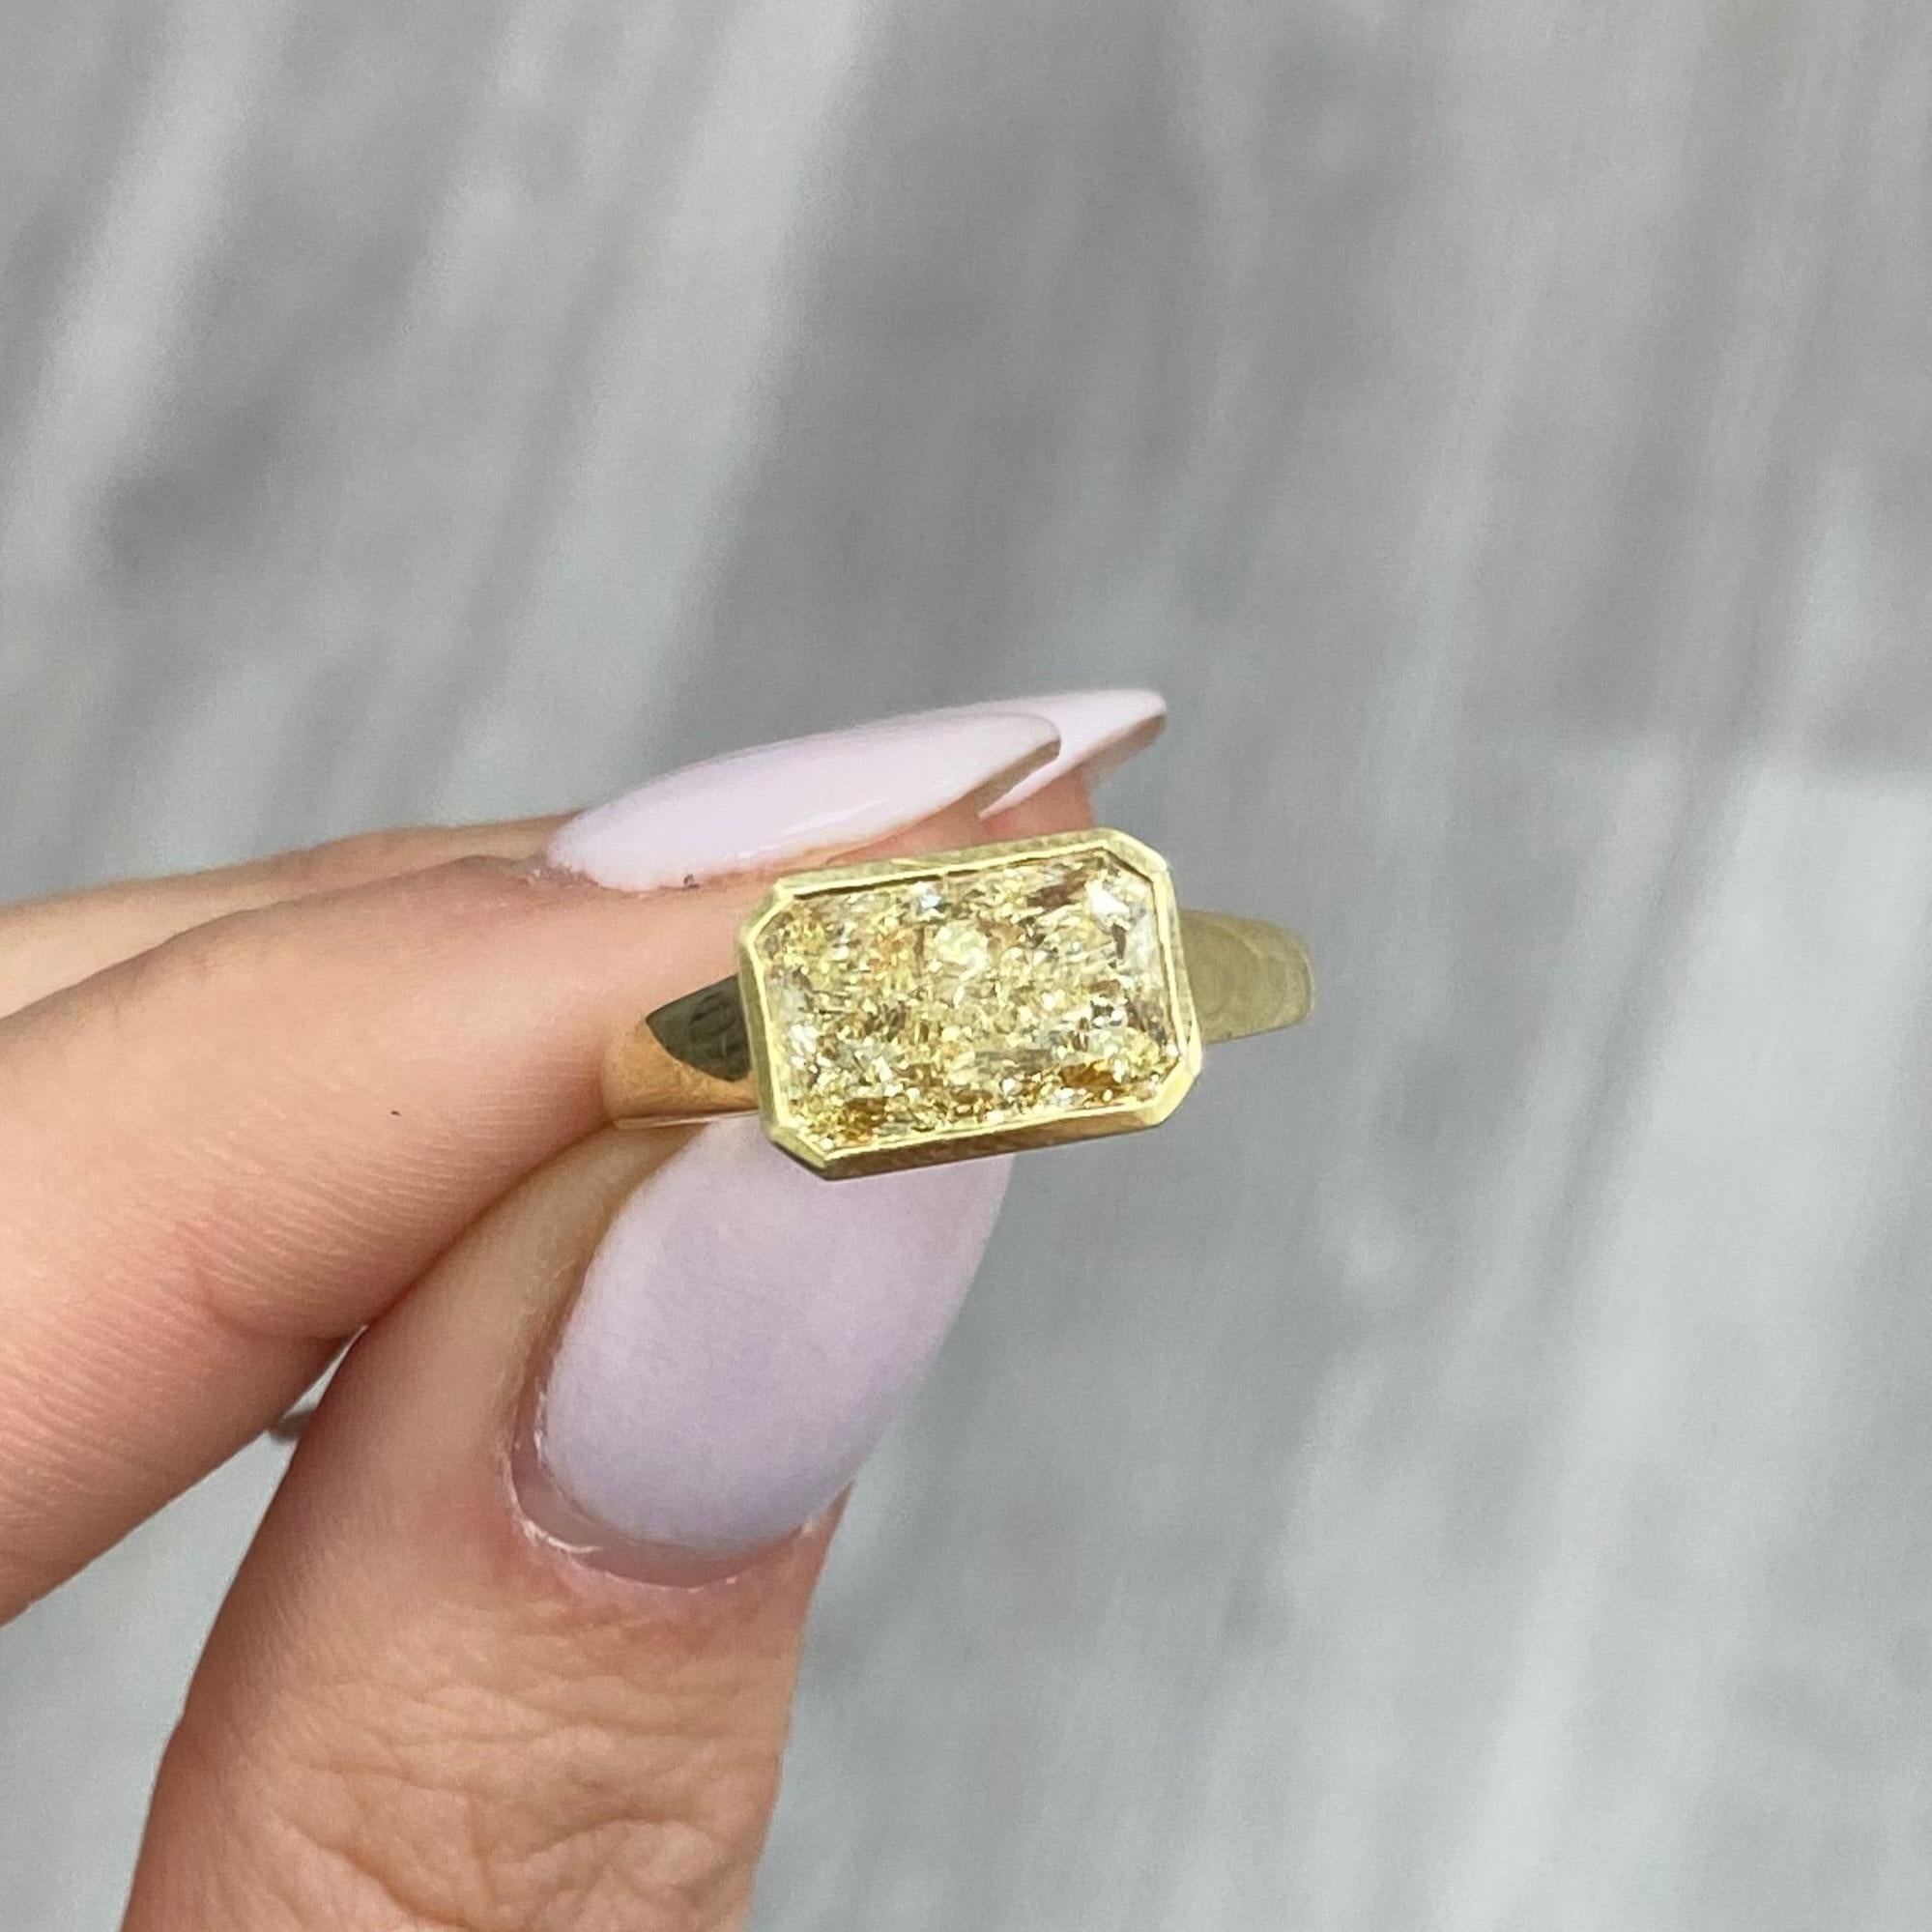 Stylish and modern ring with an extremely rectangular and vibrant 3ct Fancy Light Yellow Radiant set easy to west in a bezel set 18kt Yellow Gold ring
3.01 Carat GIA Fancy Light Yellow Diamond
VVS2 Clarity 
East to West Set
Handmade in NYC with 18k